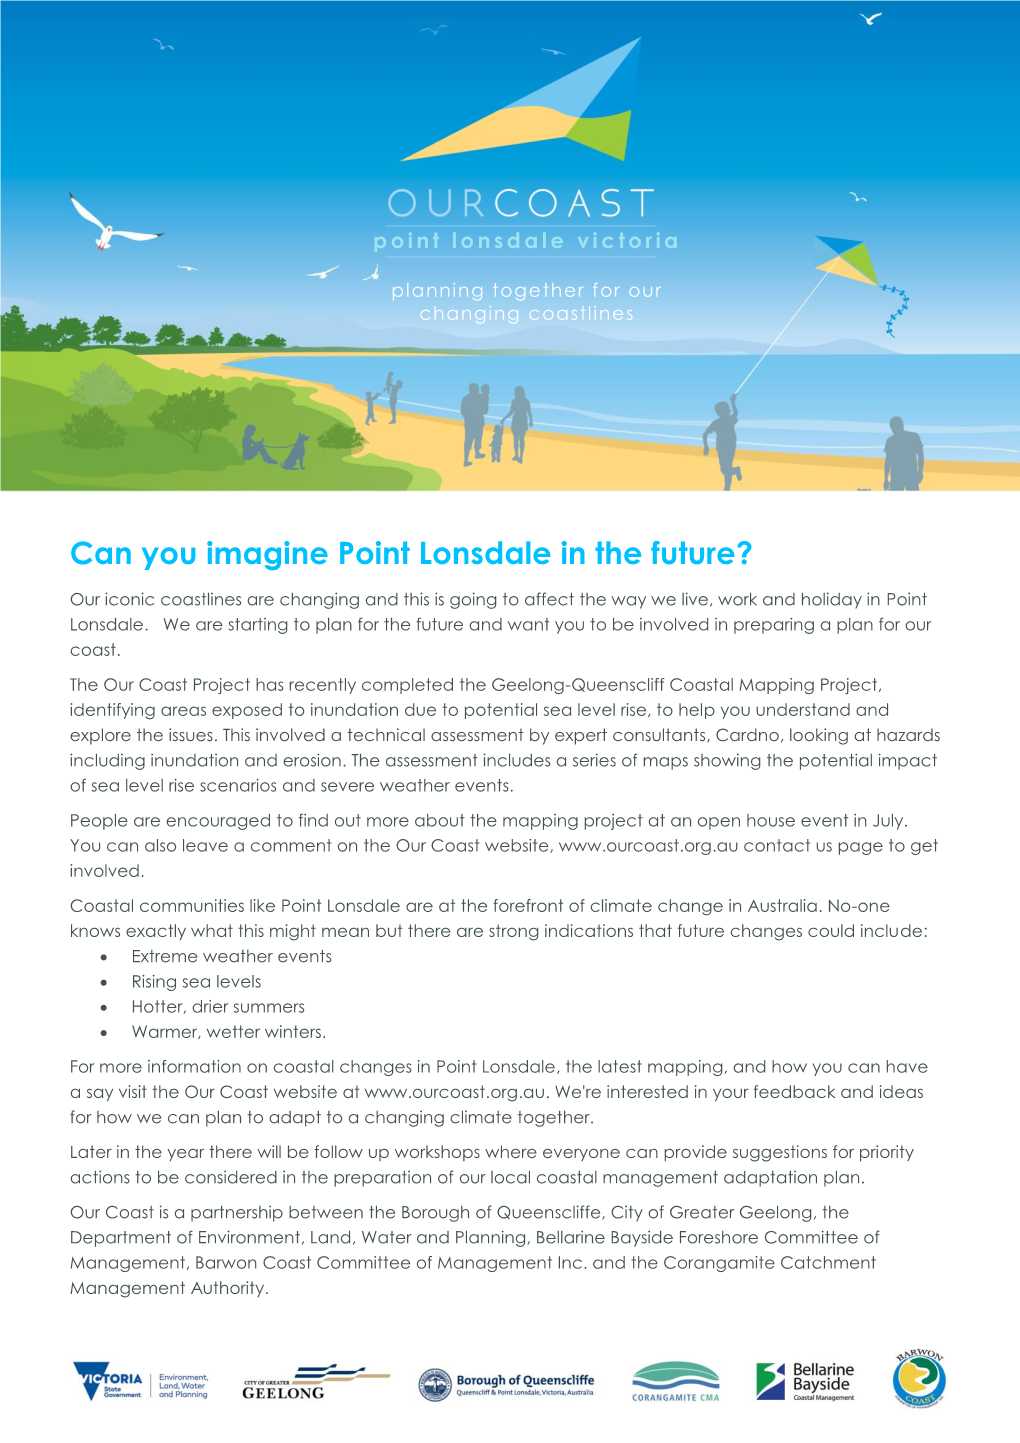 Can You Imagine Point Lonsdale in the Future?